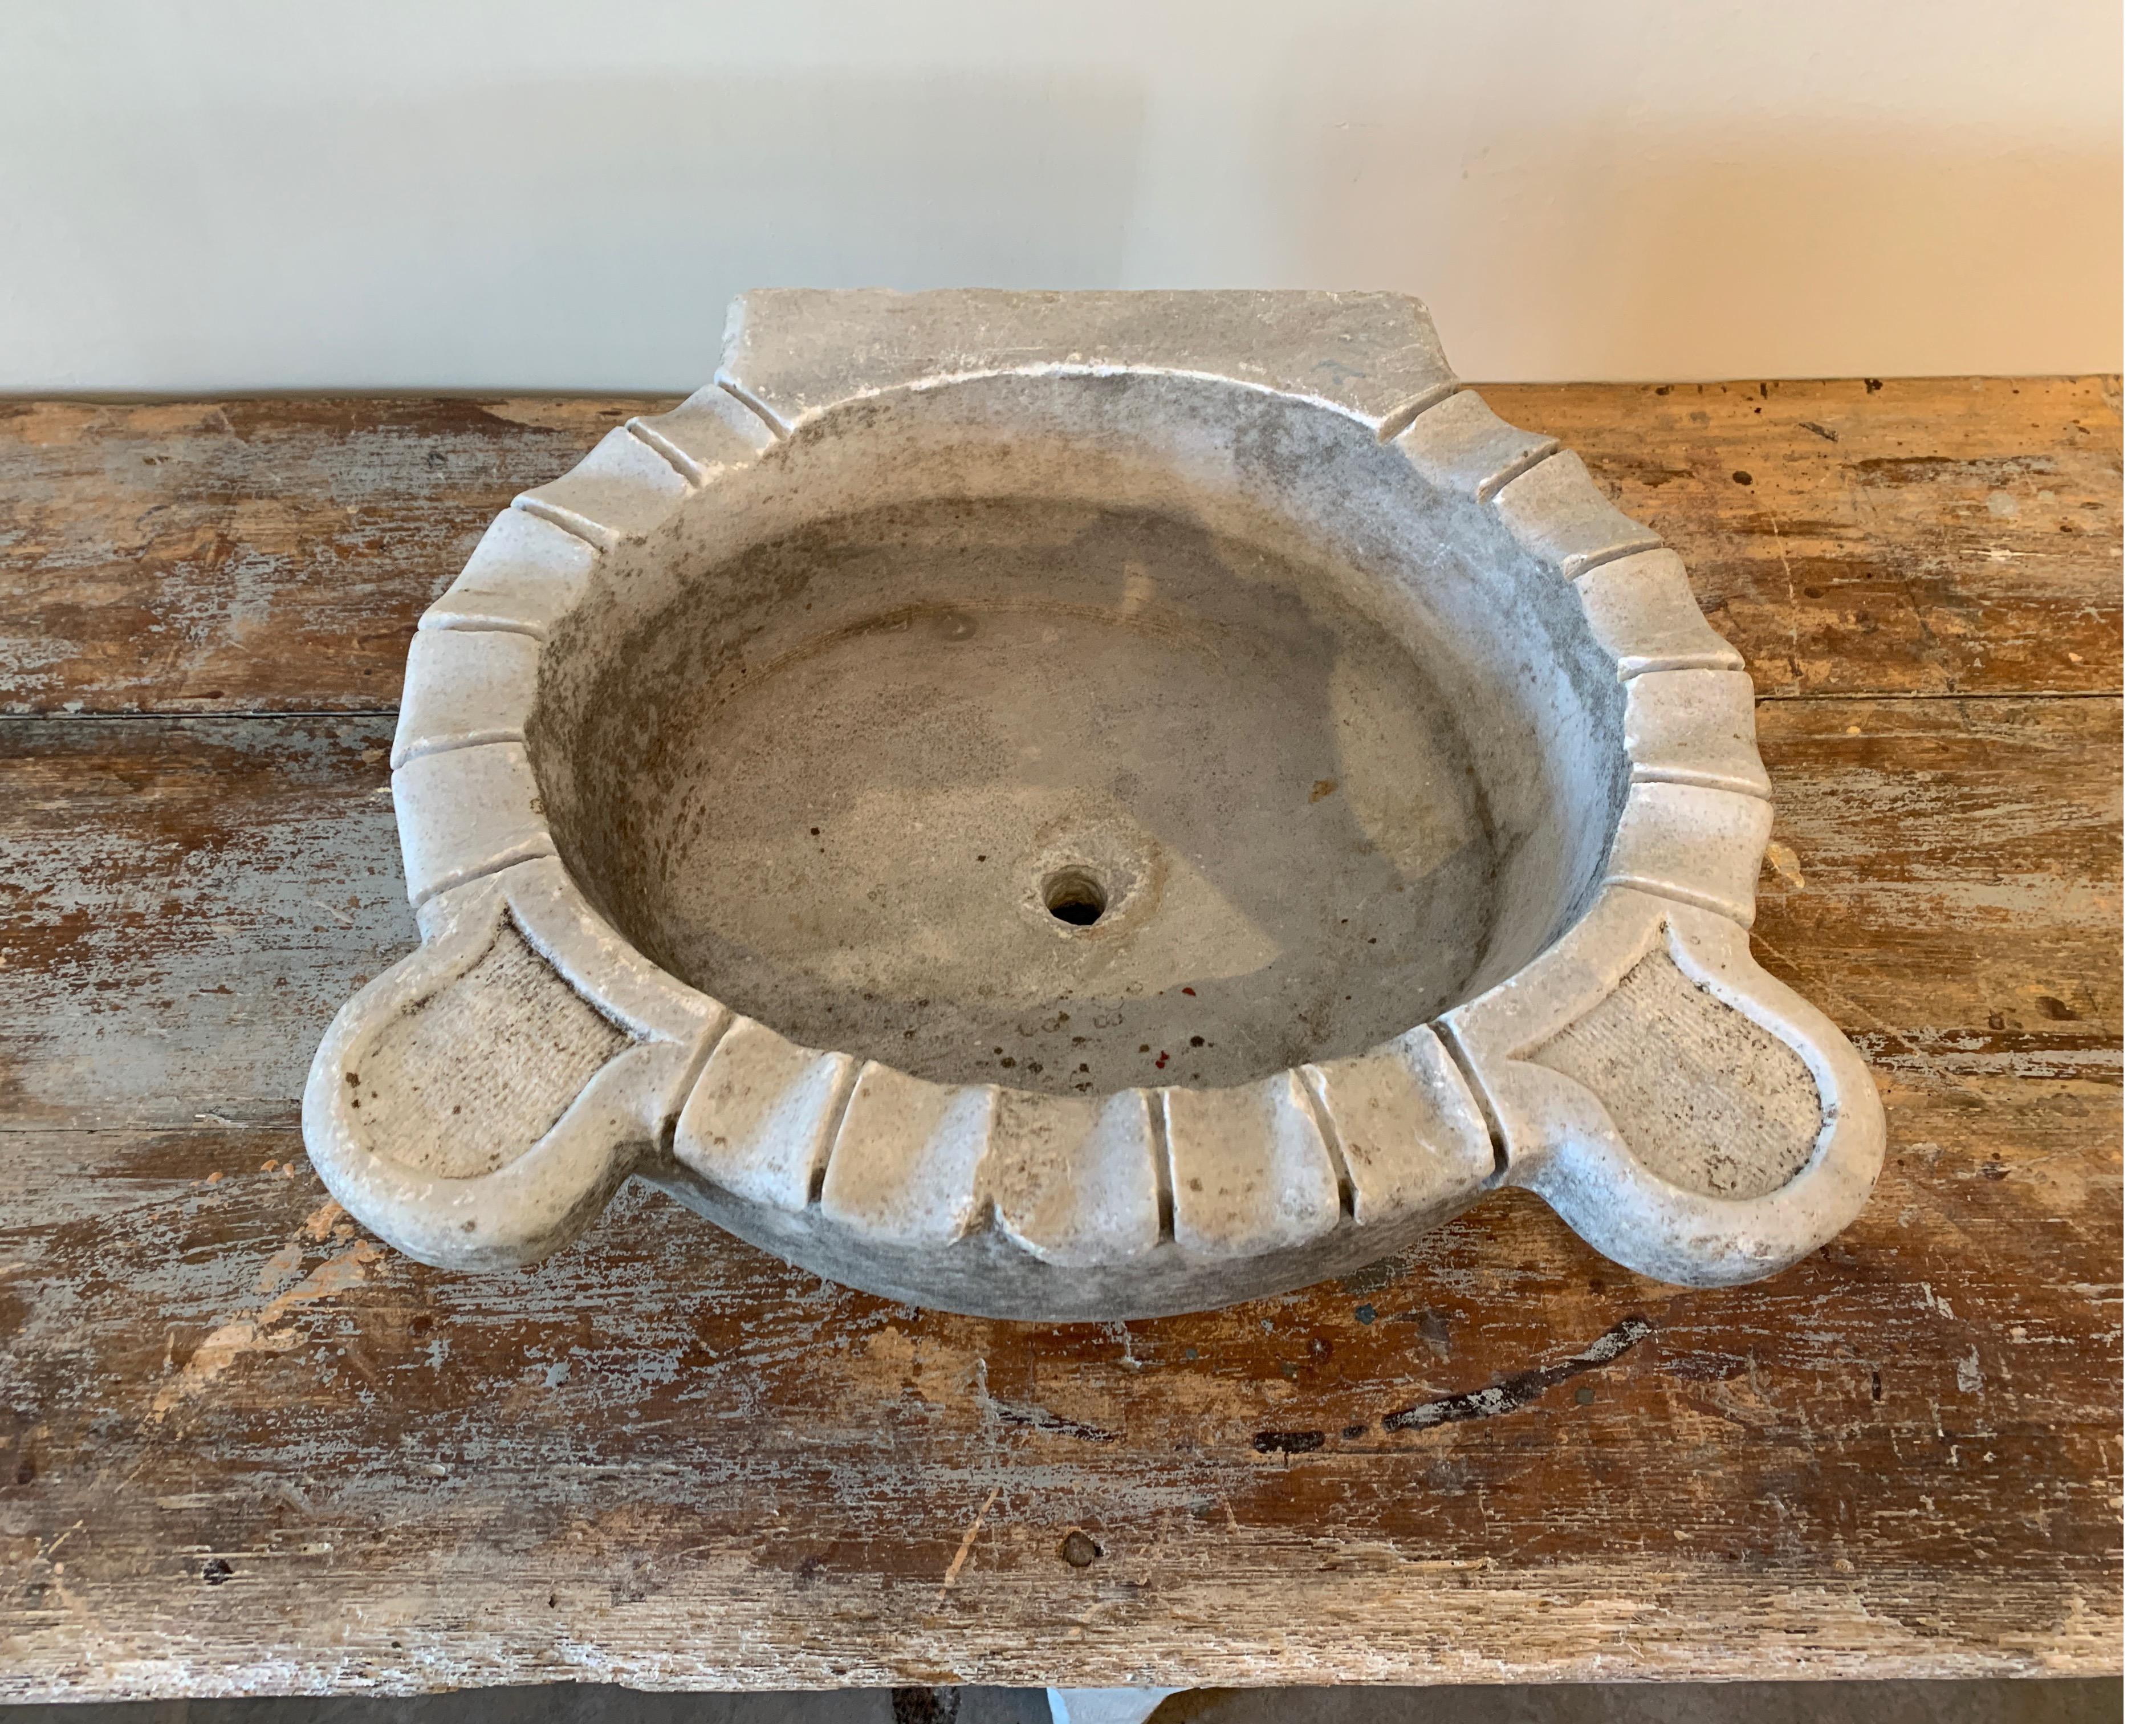 These stone sinks have been used in Turkish bath houses and homes for centuries.

This is a nice gray stone one with wonderful details throughout.